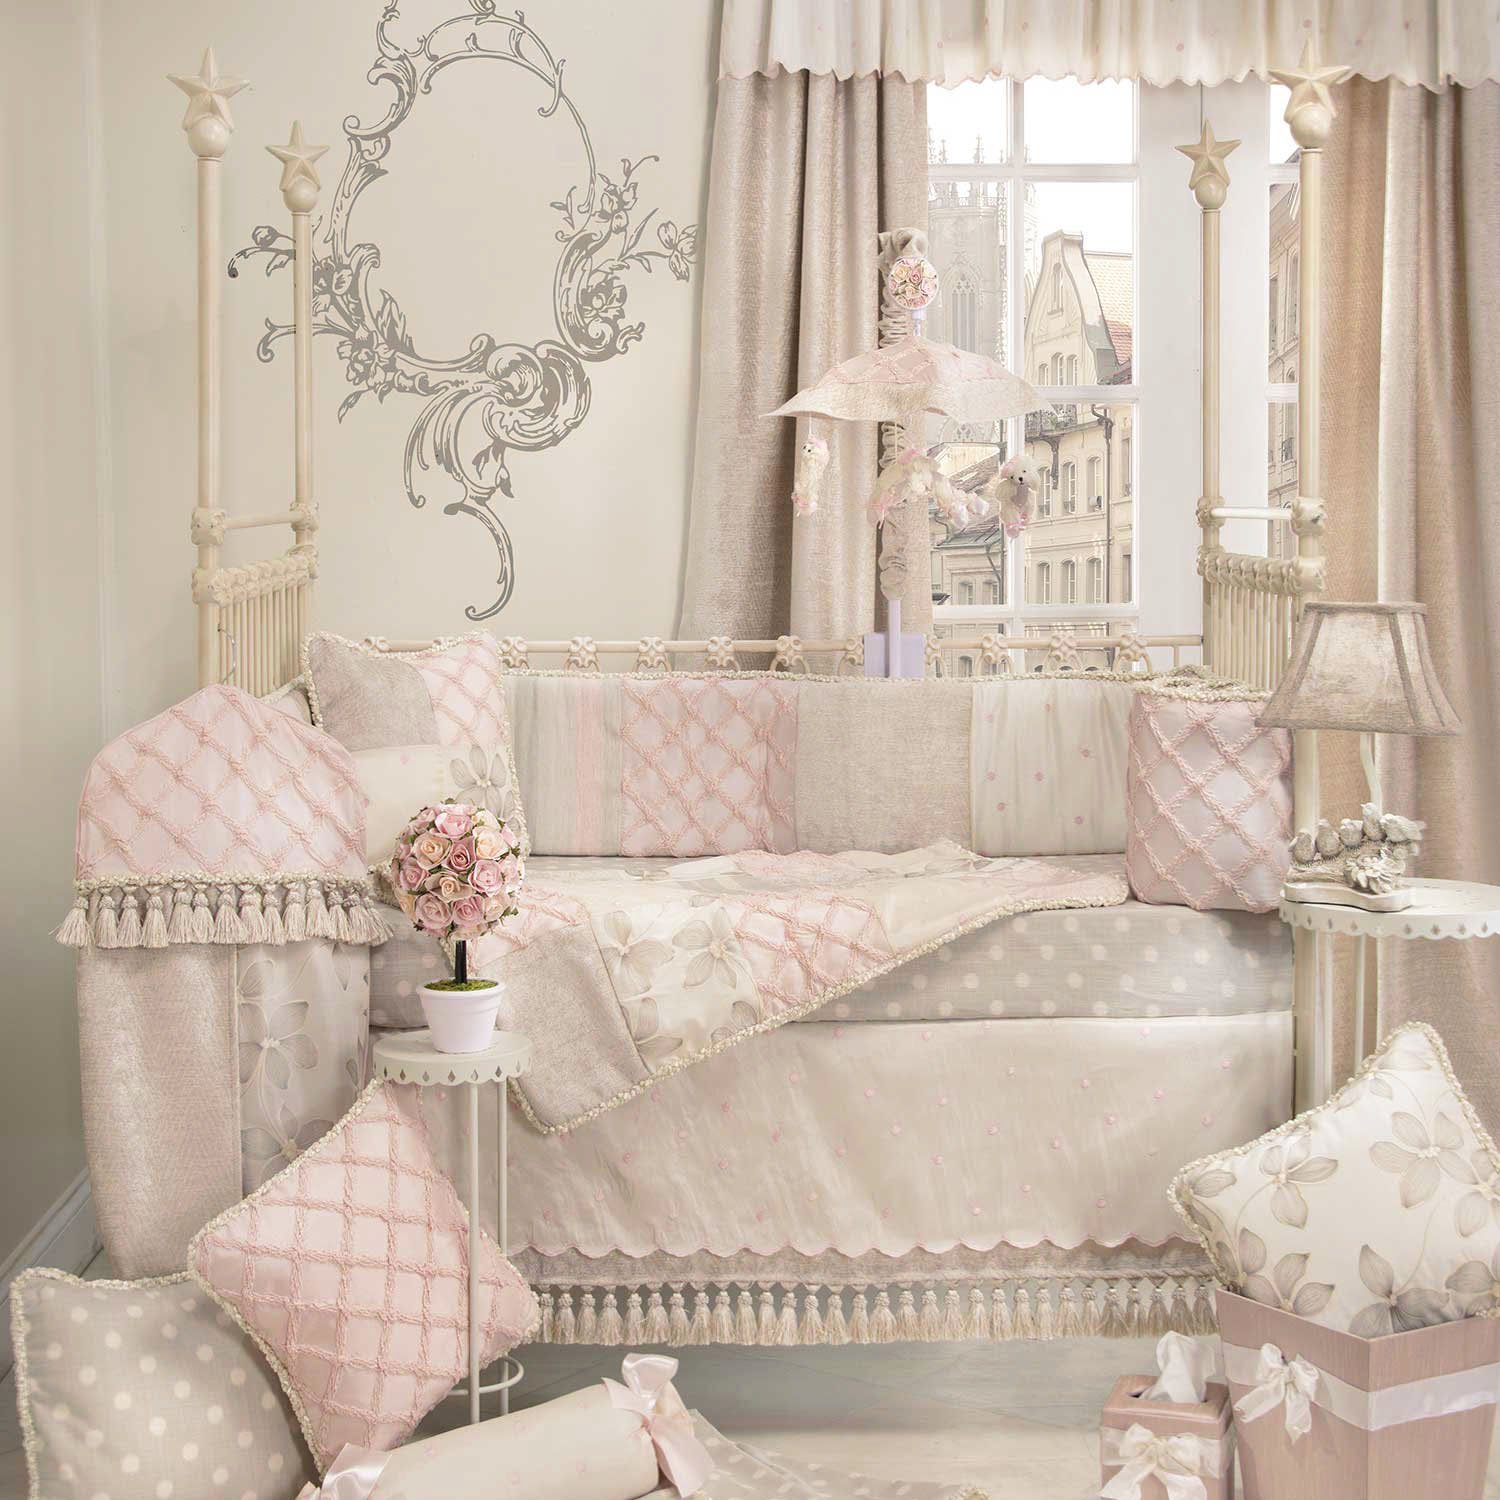 21 Inspiring Ideas for Creating A Unique Crib With Custom Baby Bedding ...